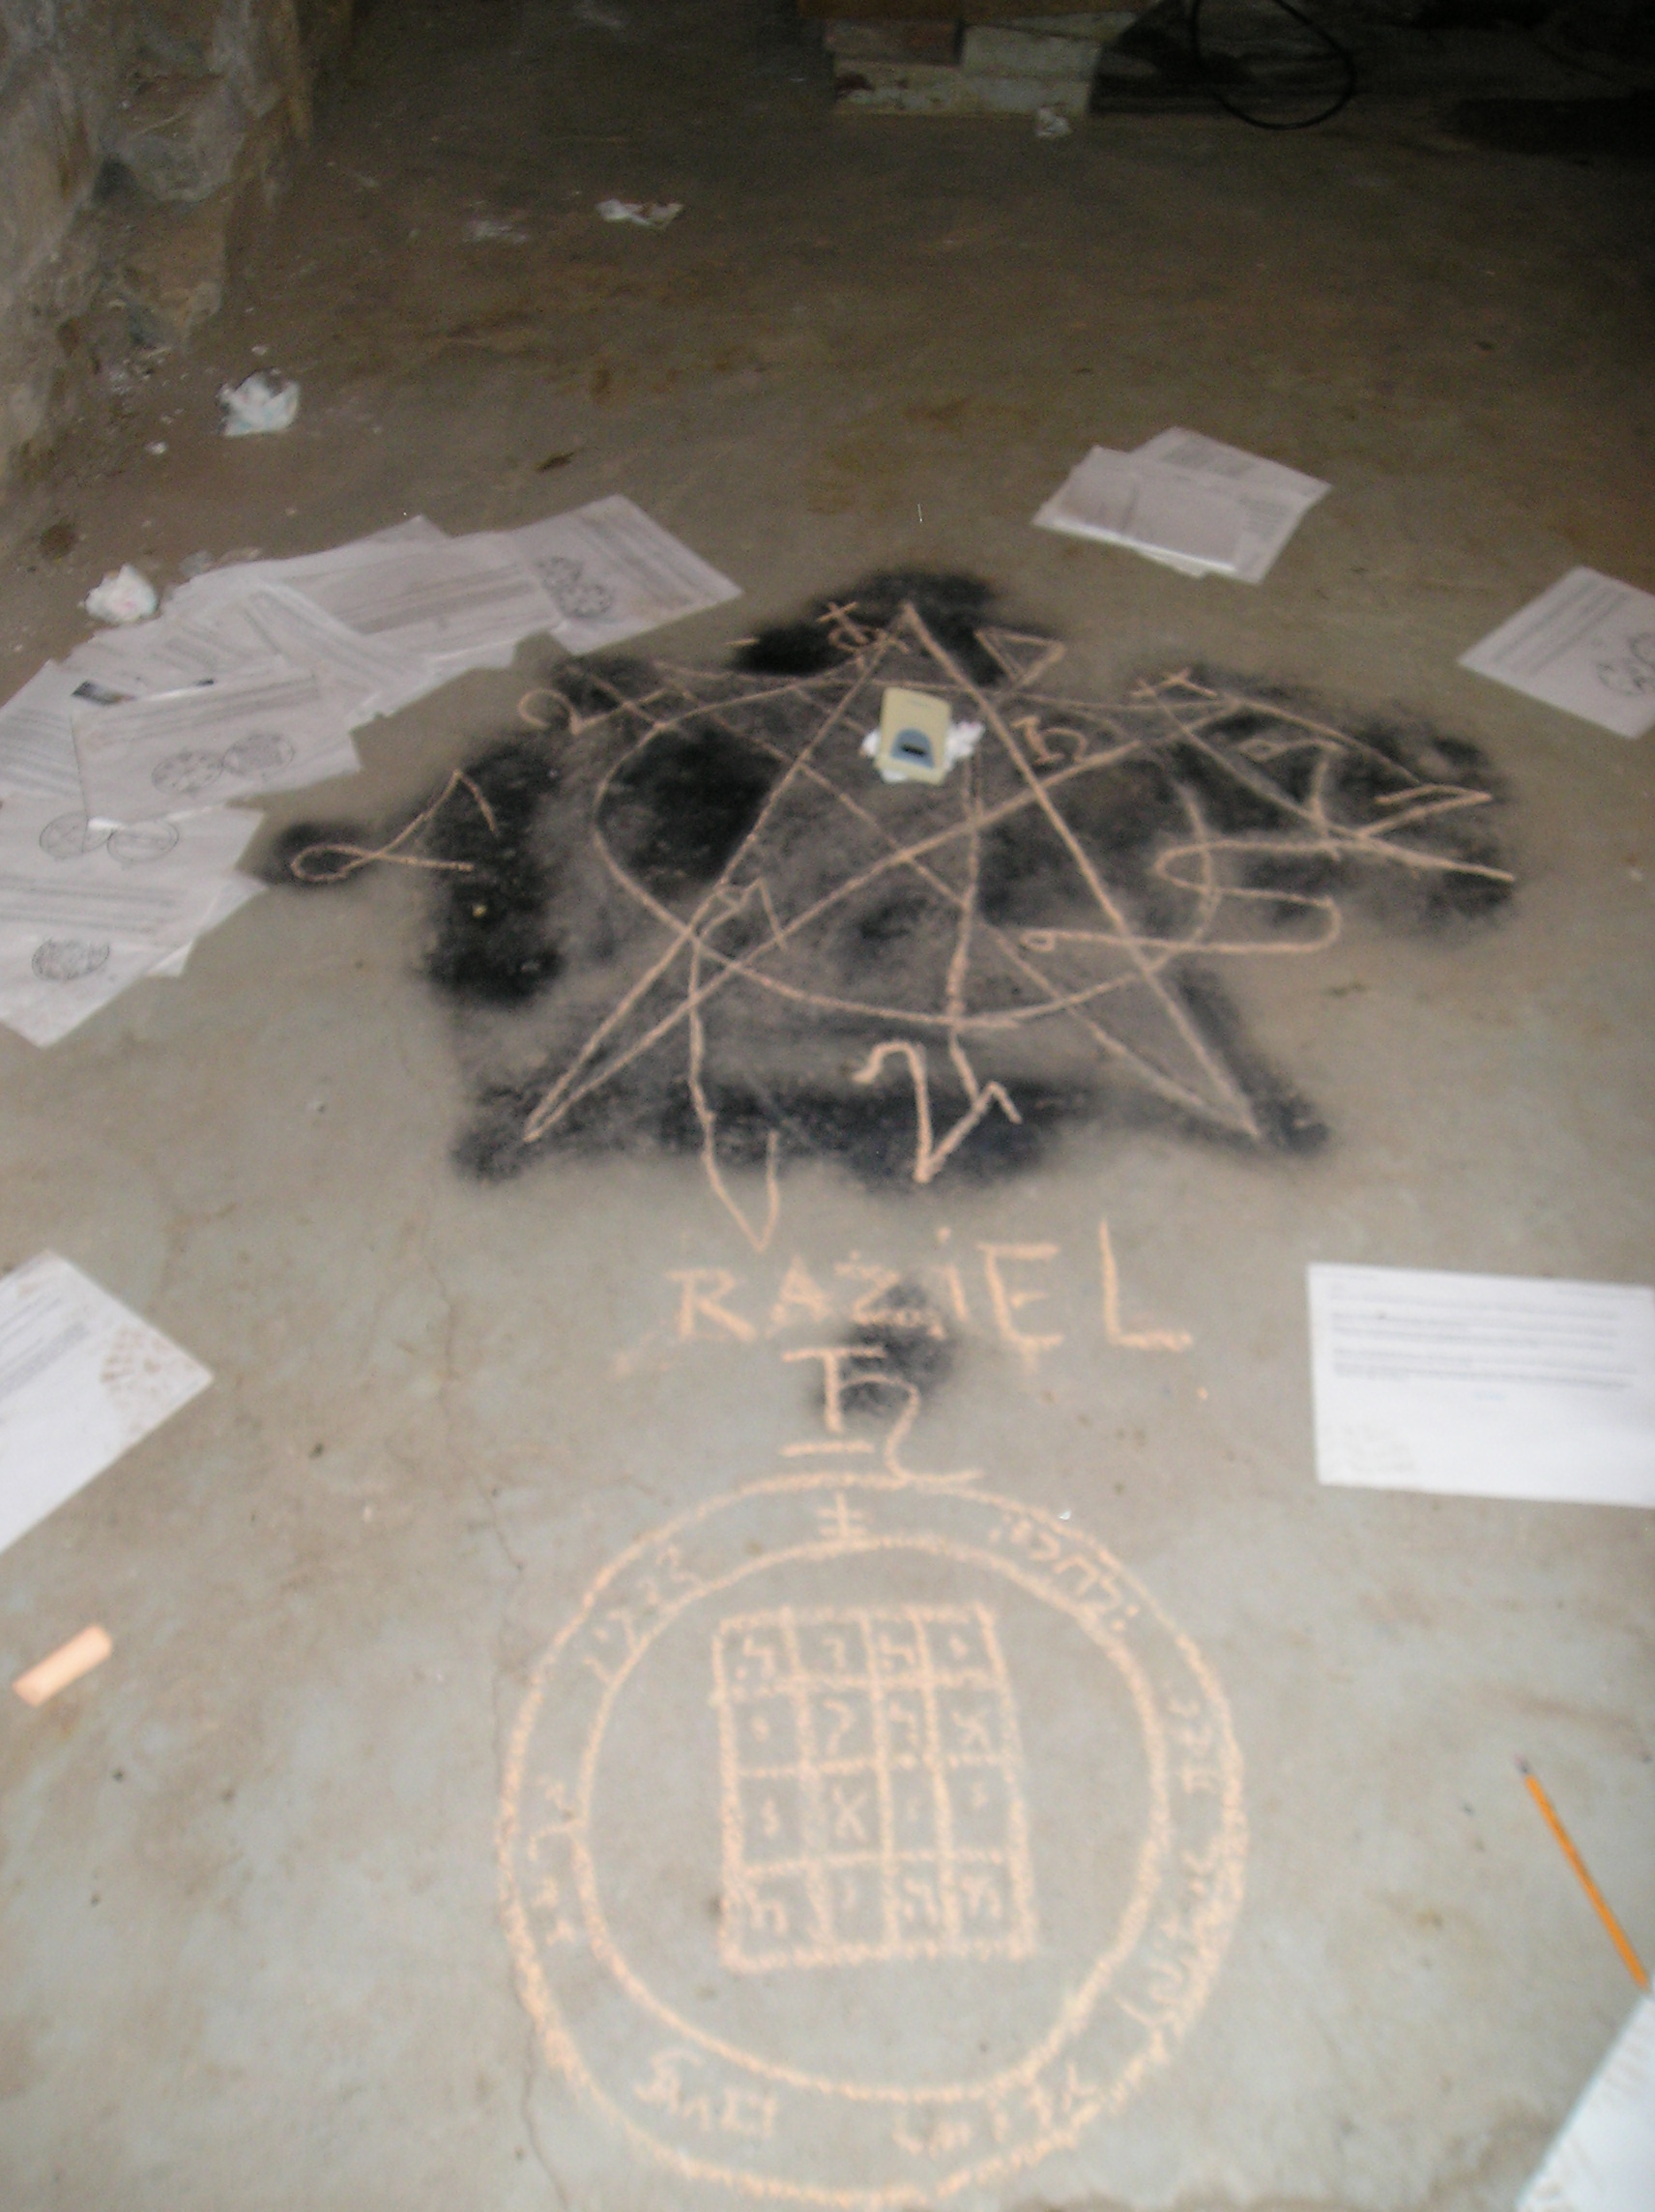  A demonologist’s attempt at retracing the pentagram that was left on the floor of the basement by a previous tenant, in order to determine what spells had been cast, and then adding some protective sigils in its place. 